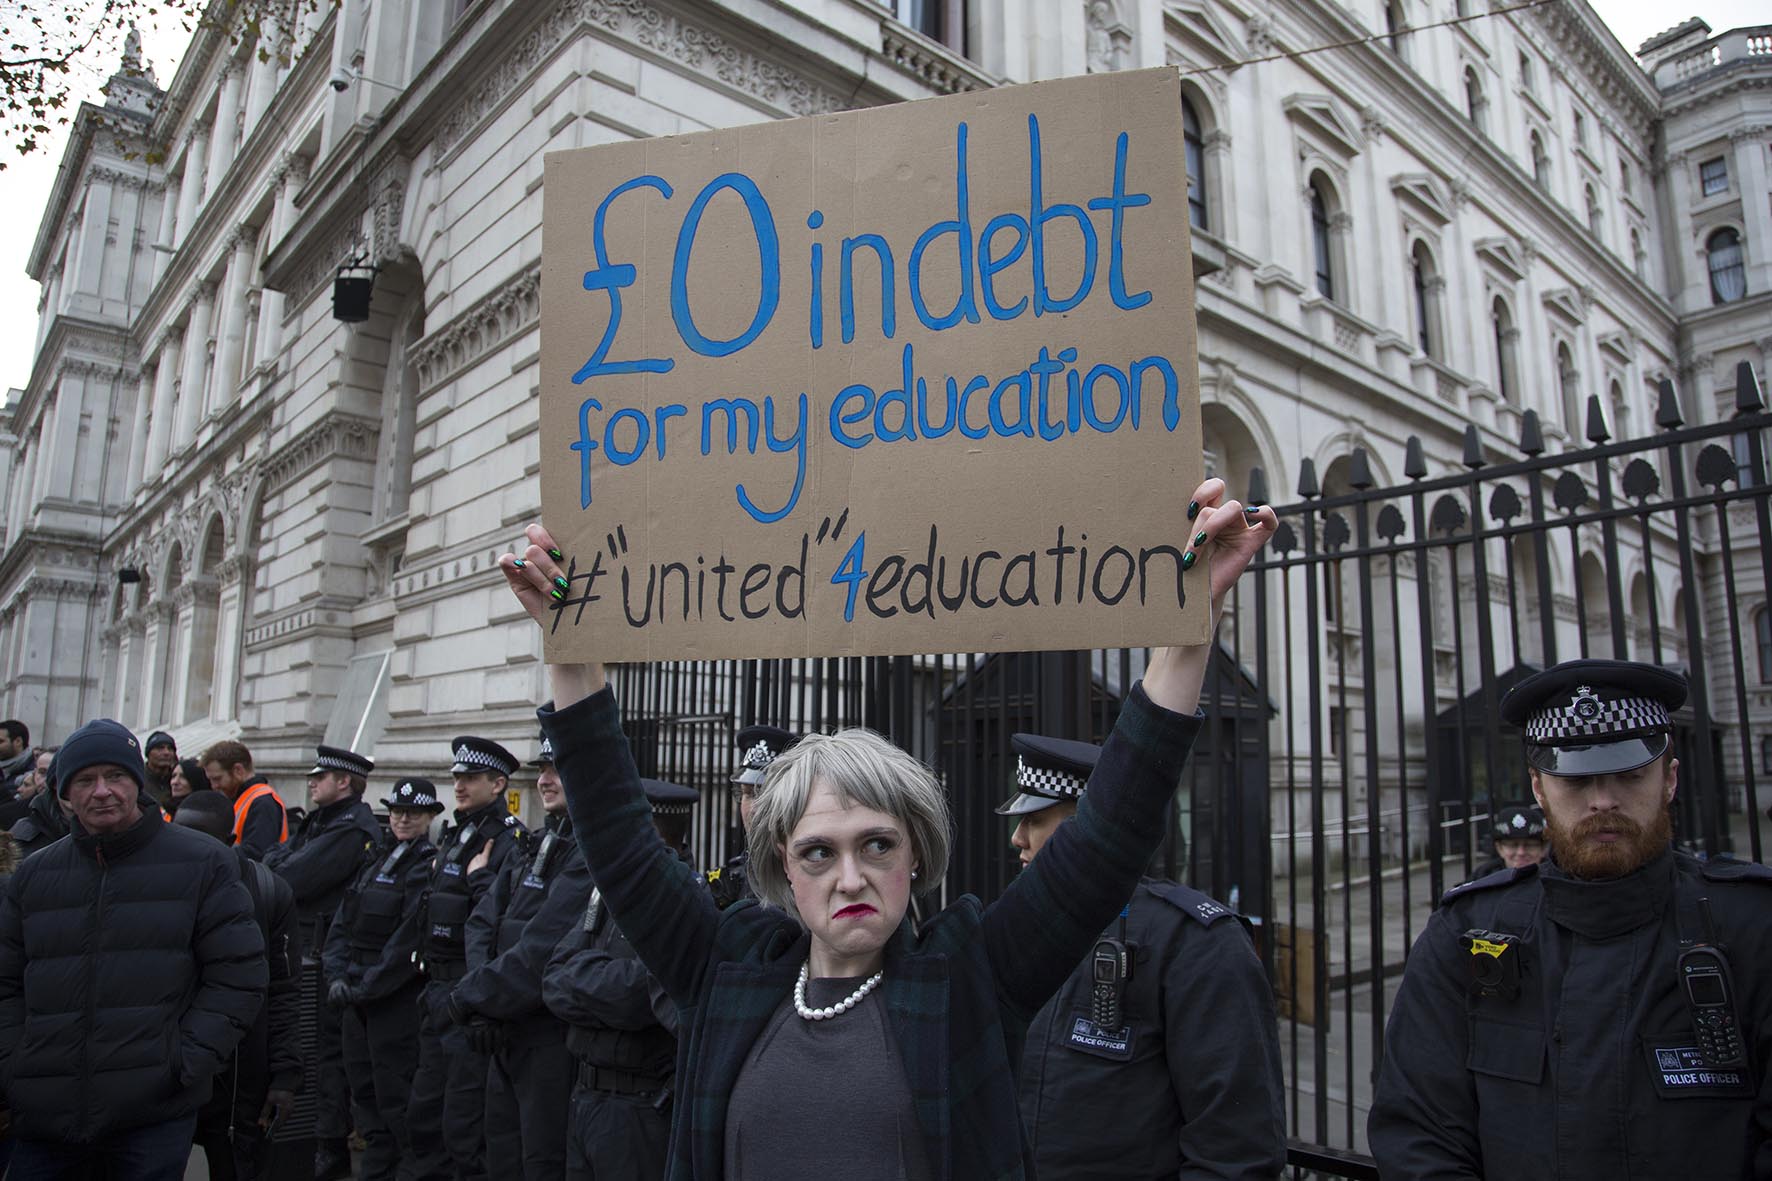  Protester dressed as Theresa May outside Downing Street during student demonstration in London. 